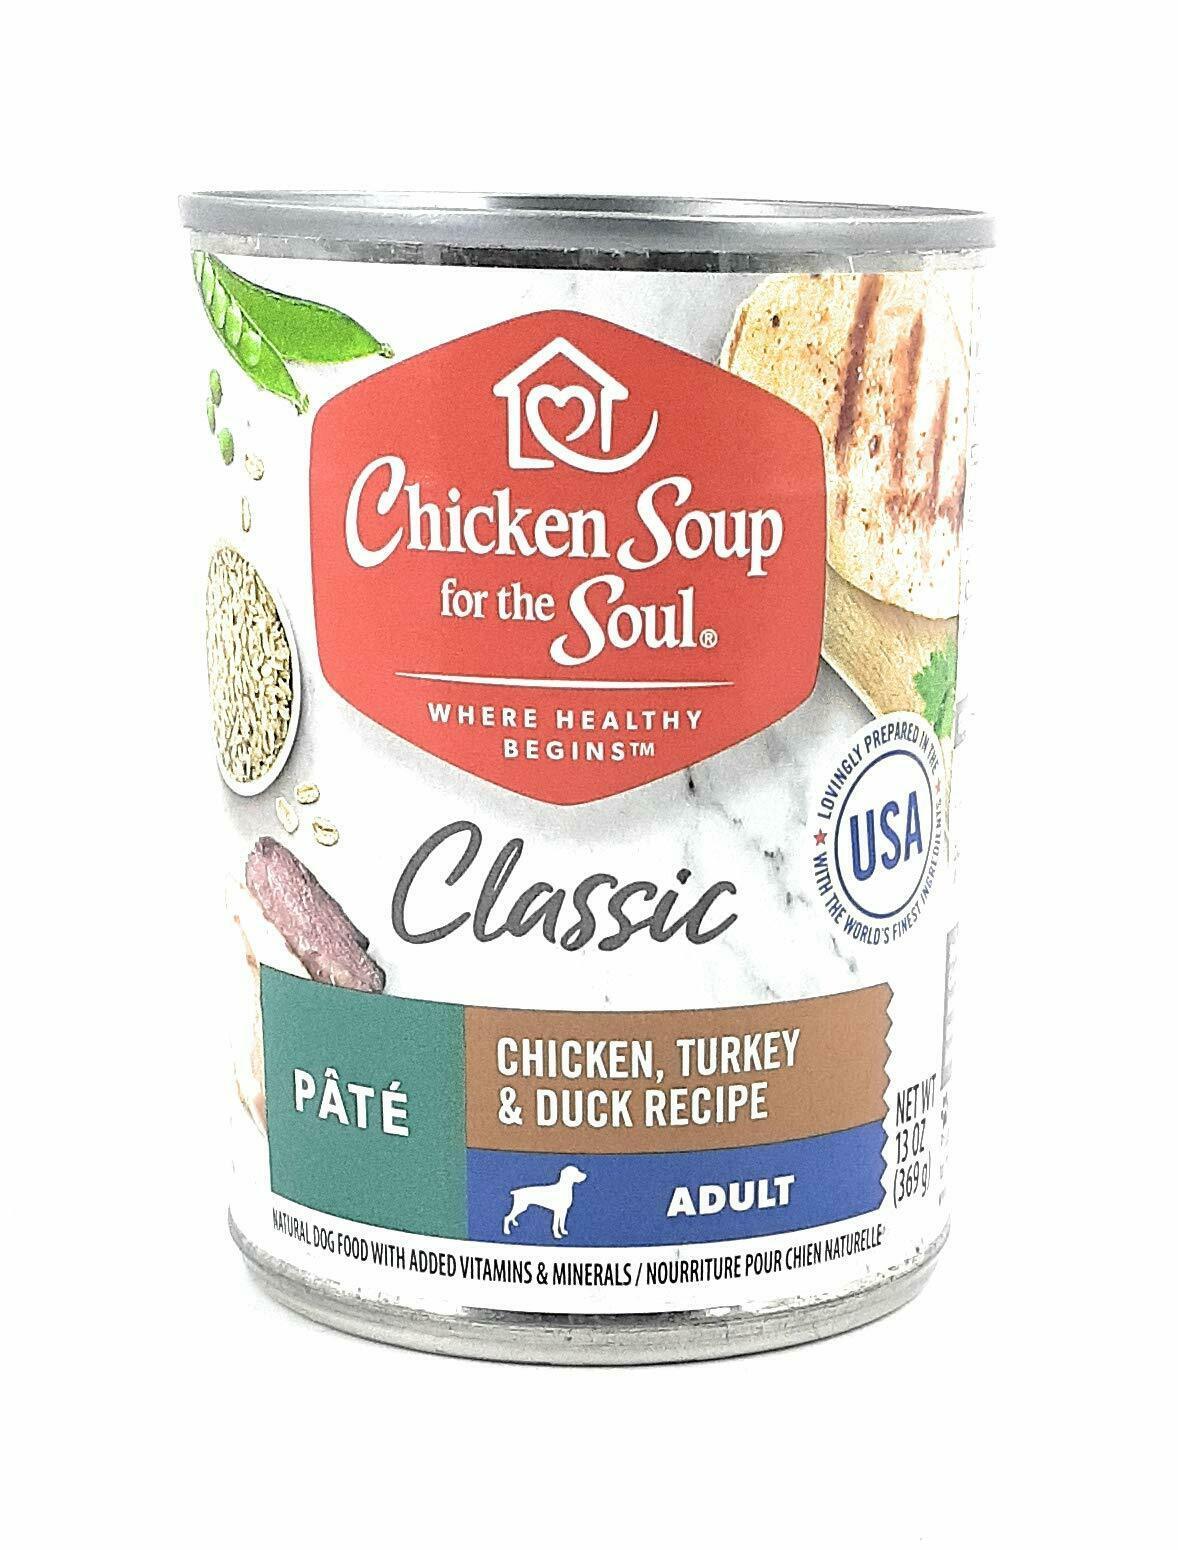 Chicken Soup for the Soul Dog Food Variety Pack 1 Bag of Grain Free Dry ...